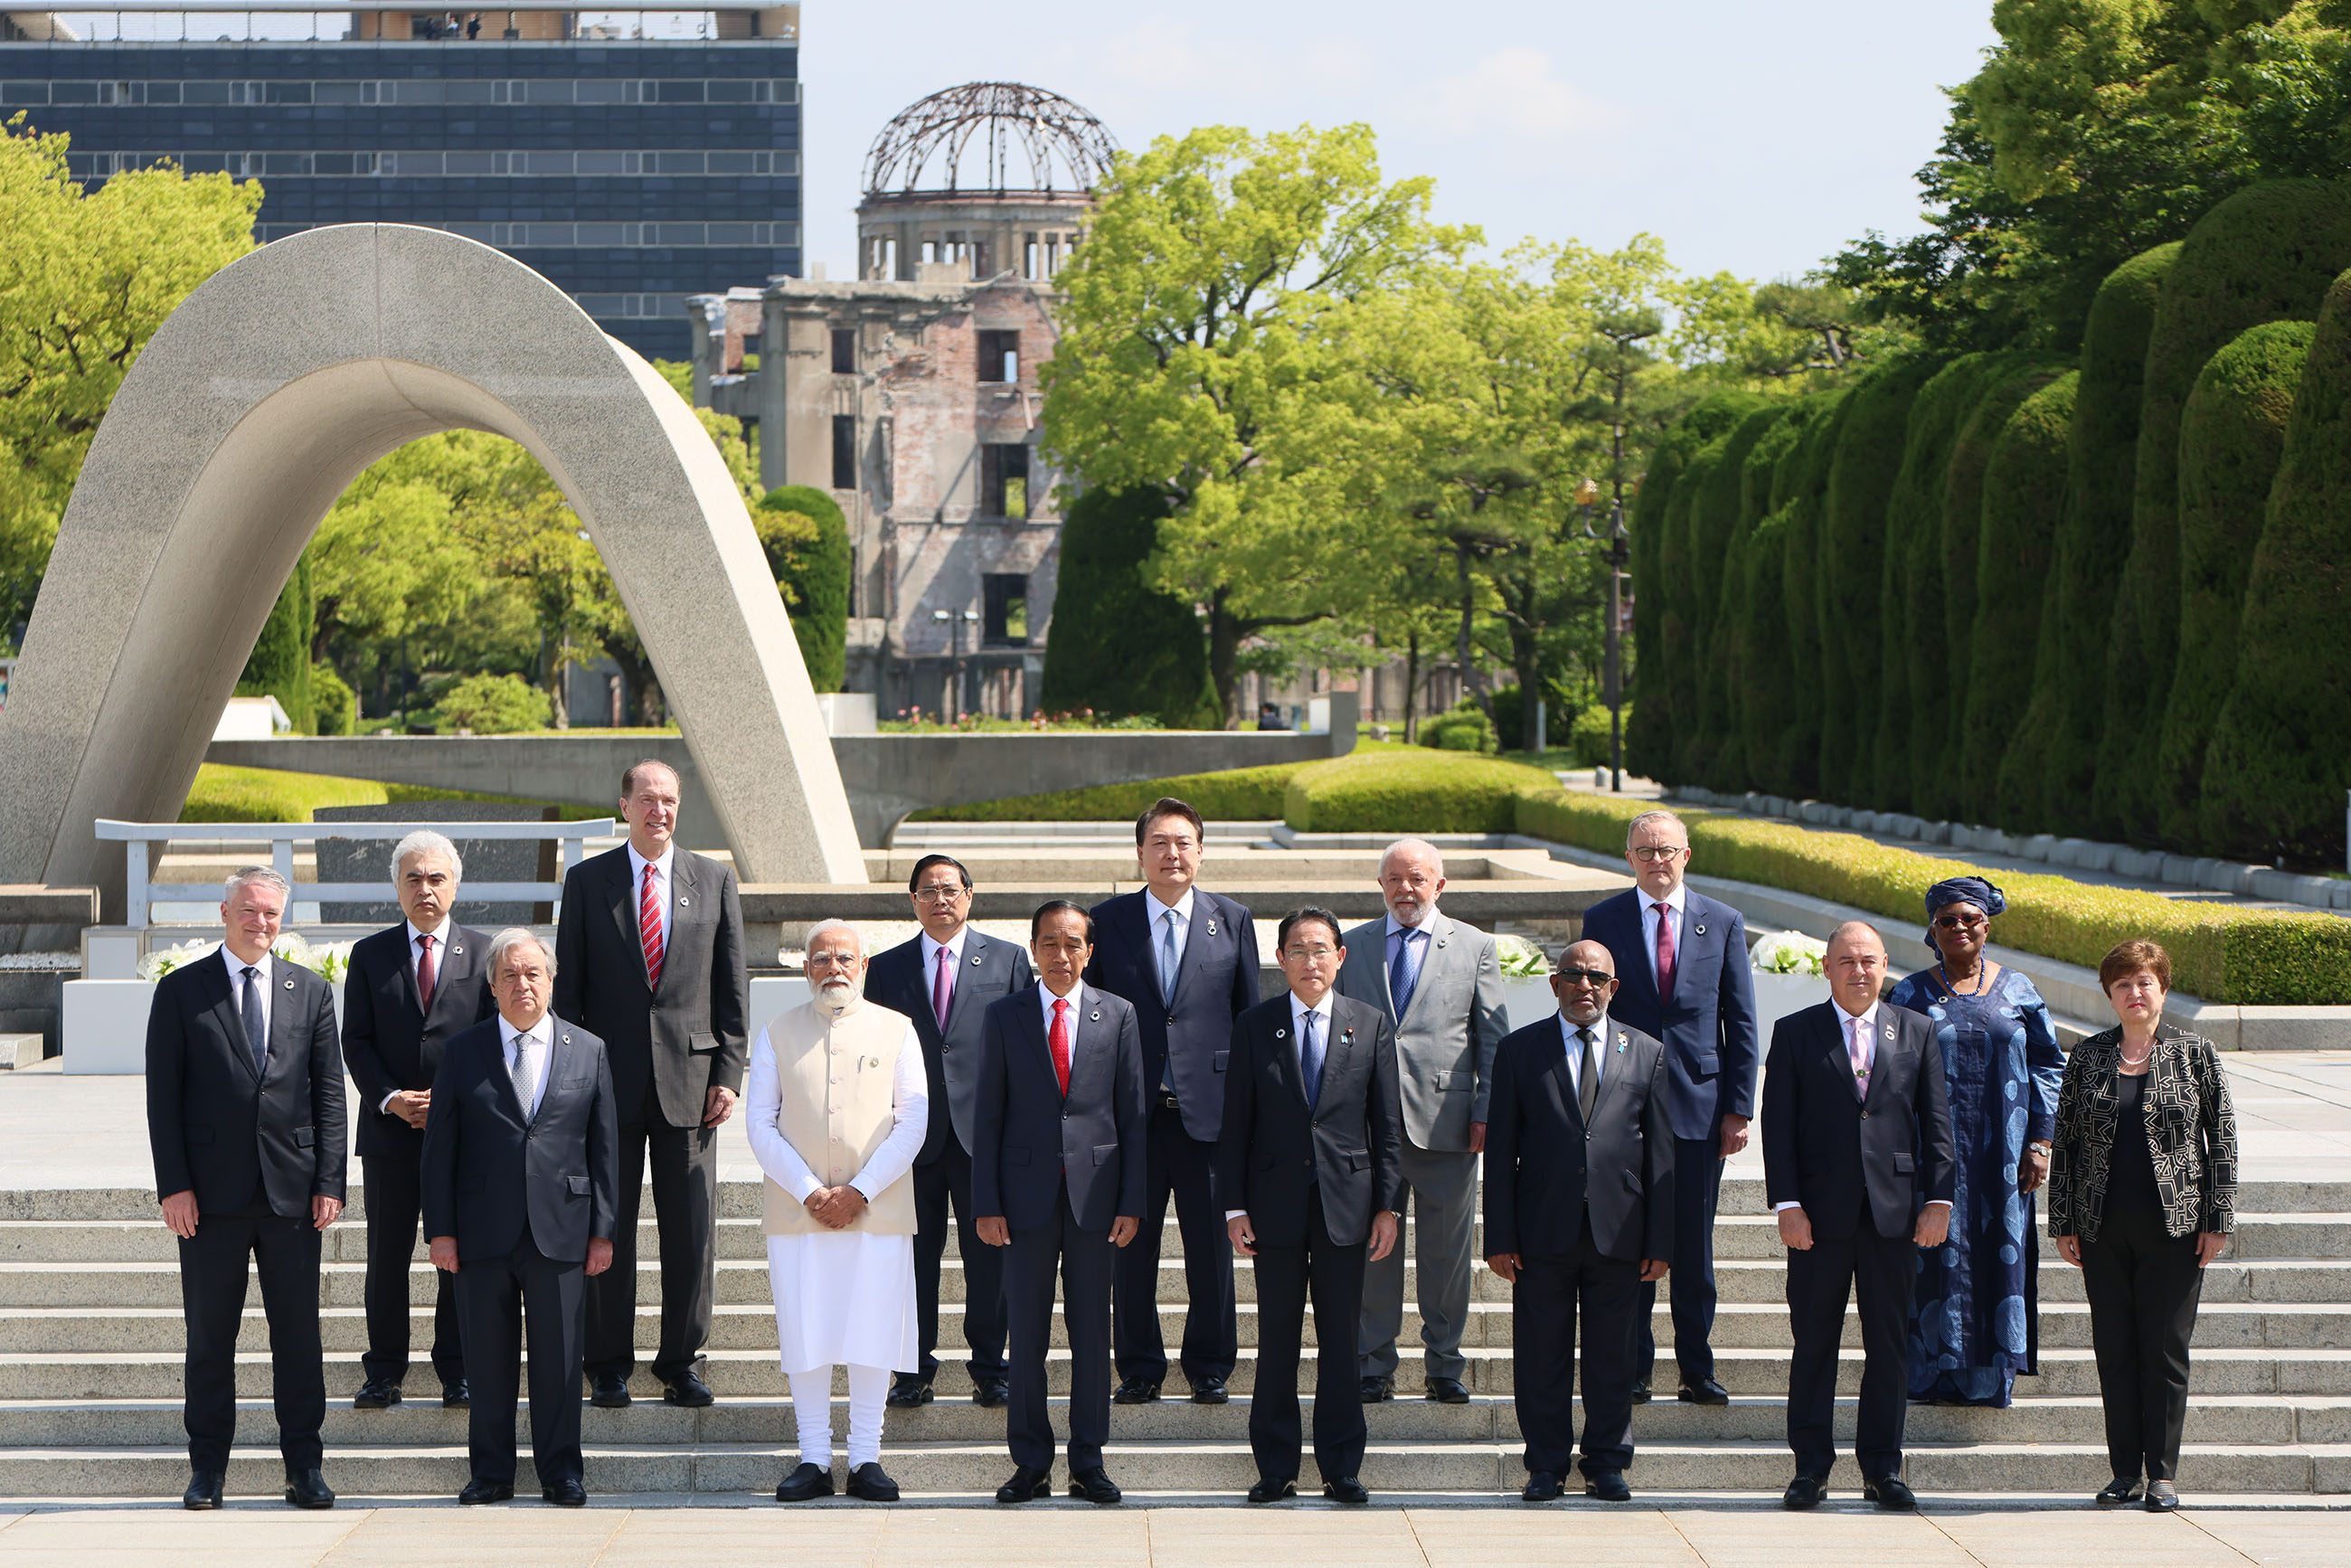 G7 Hiroshima Summit (Third Day): Events with the Invited Countries and Others at the Hiroshima Peace Memorial Park